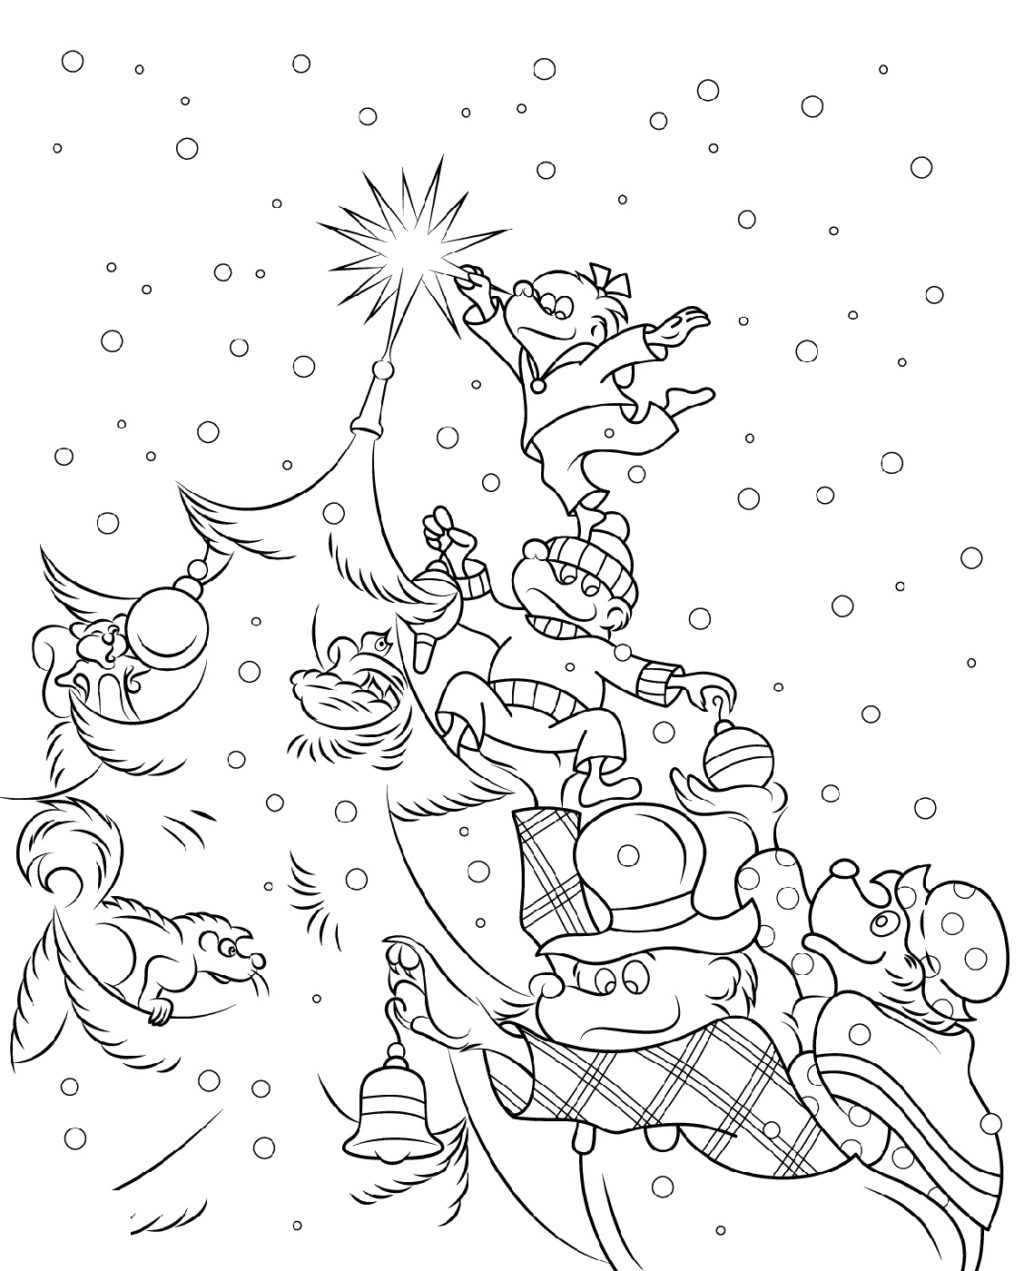 Berenstain Bears Coloring Pages Coloring Book World Berenstain Bears Coloring Pages K5 Worksheets